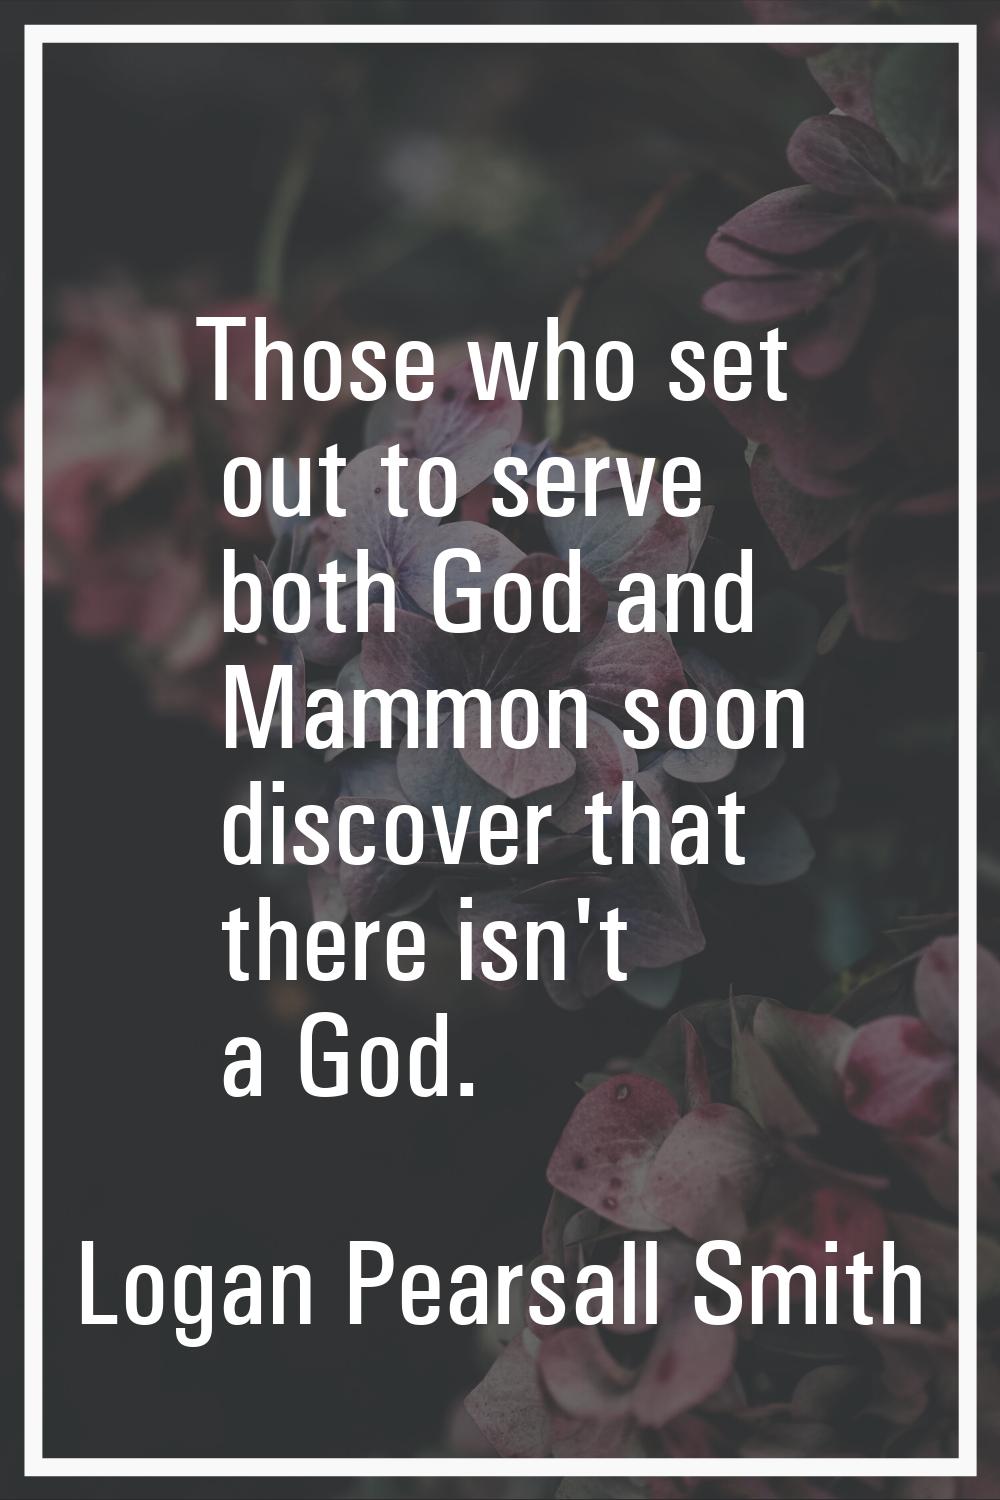 Those who set out to serve both God and Mammon soon discover that there isn't a God.